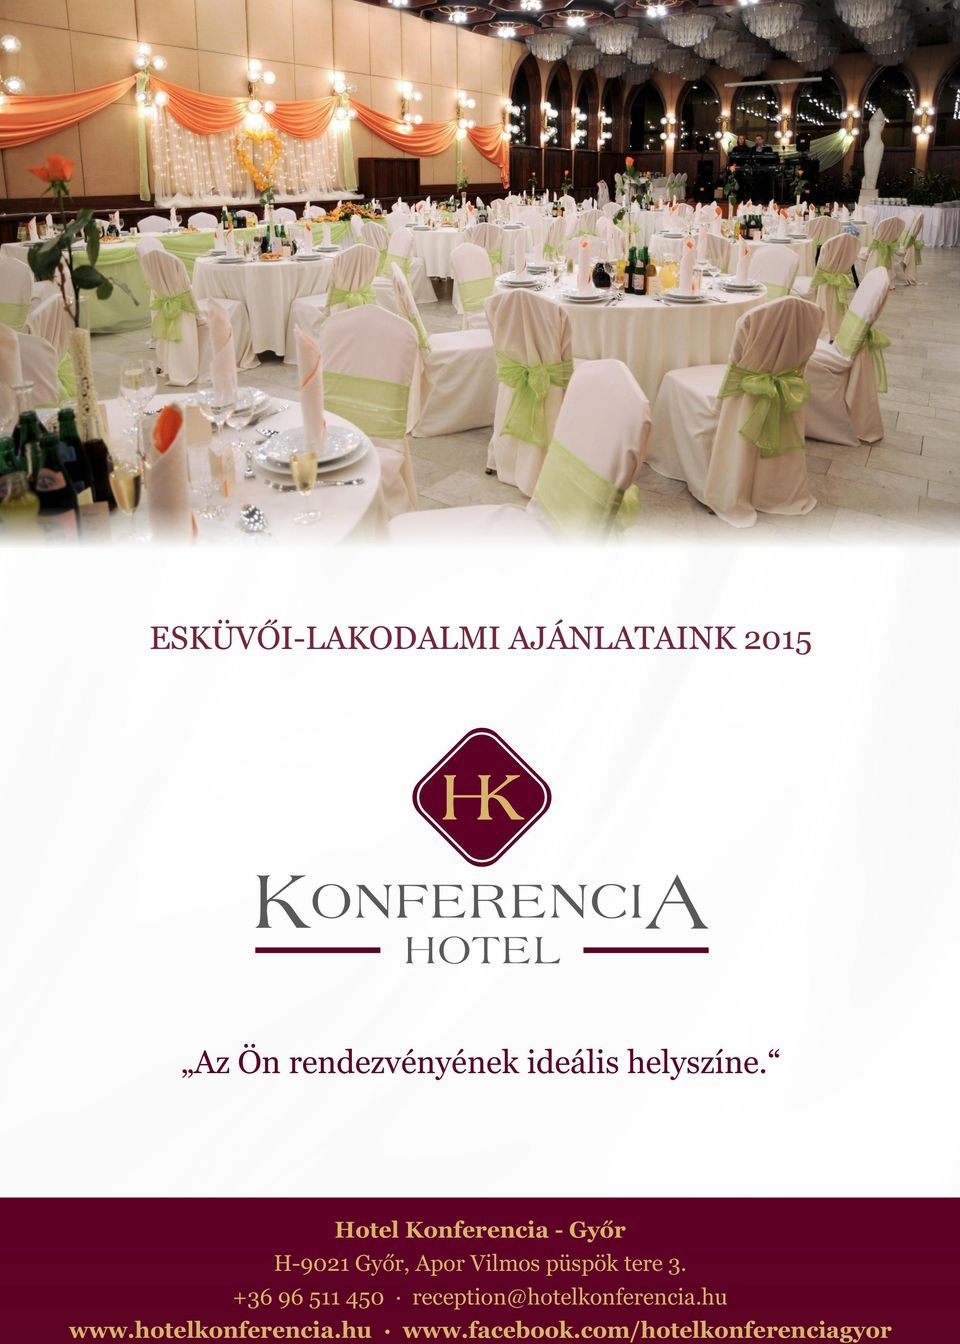 ONFERENCIA K HOTEL